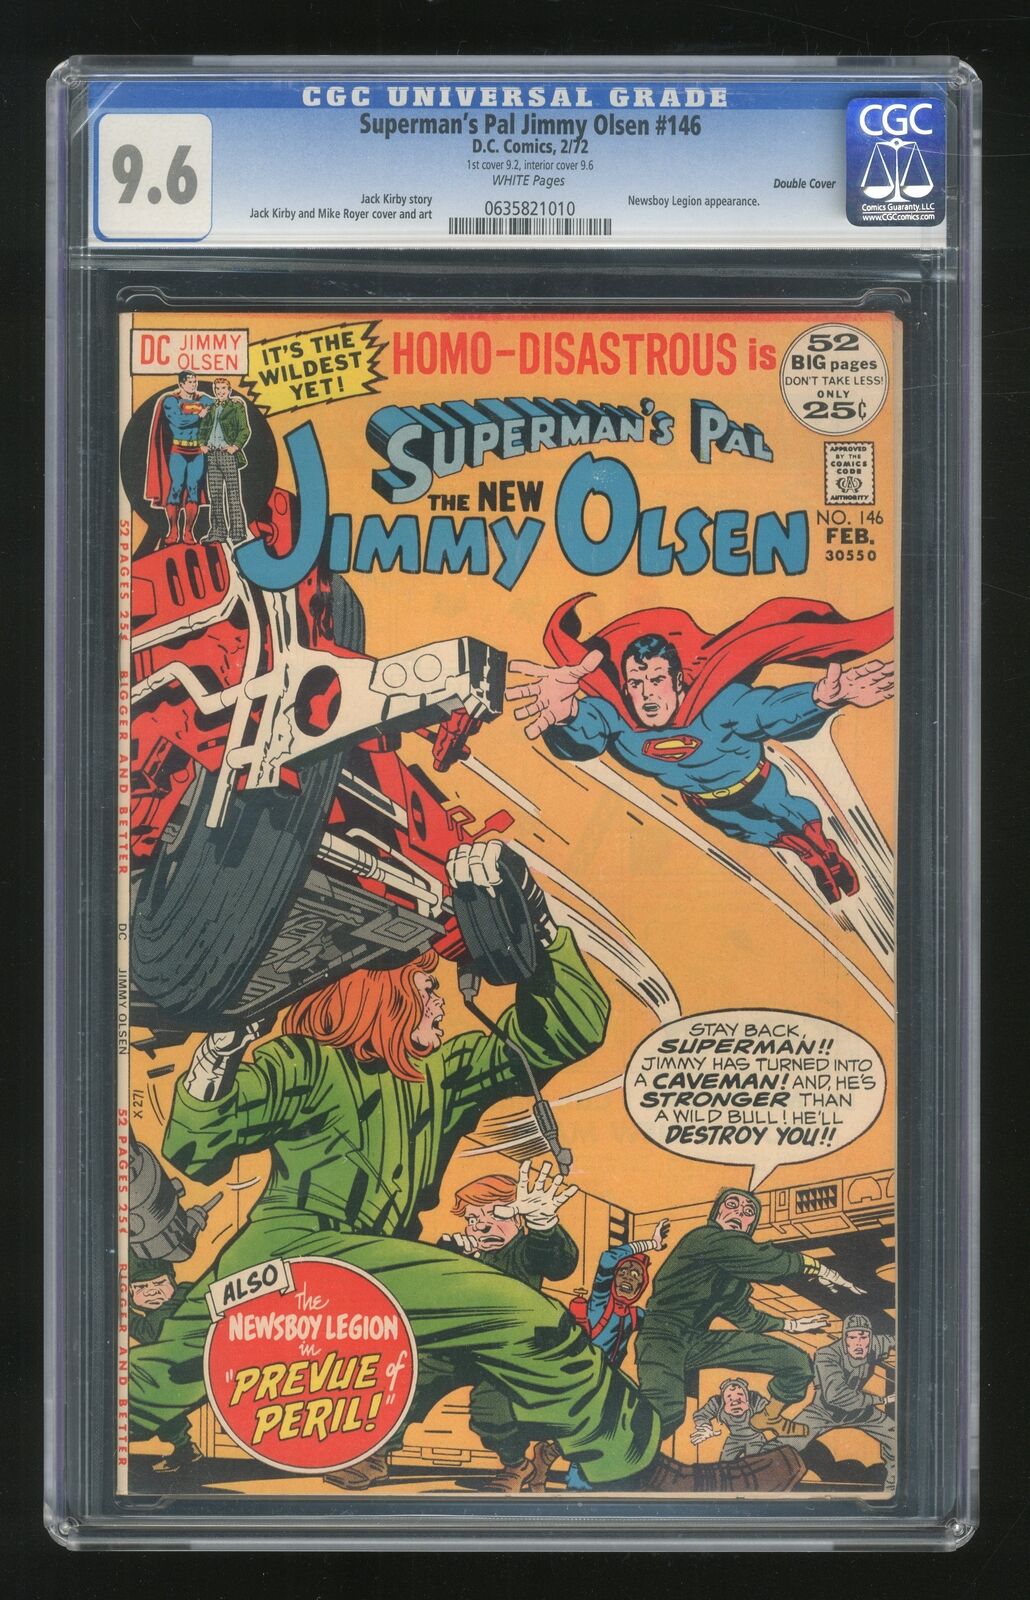 Superman's Pal Jimmy Olsen #146 CGC 9.6 Twin Cities Double Cover 0635821010